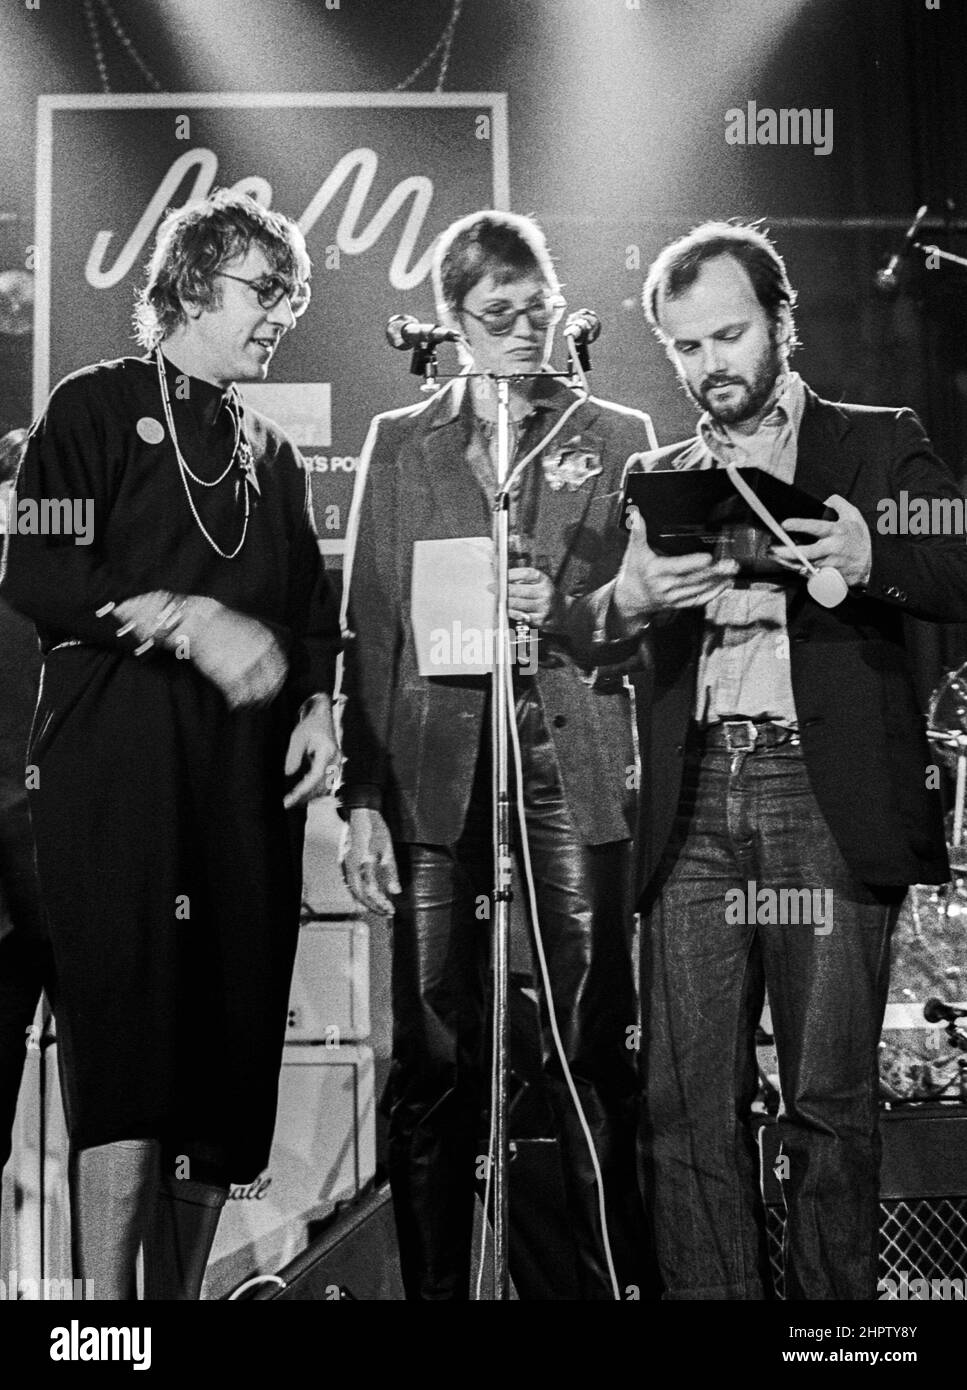 British DJ John Peel, OBE receiving an award from Peter Cook (wearing a dress) and Janet Street-Porter at a Melody Maker poll awards ceremony in London in 1979. Real name John Ravenscroft. Stock Photo